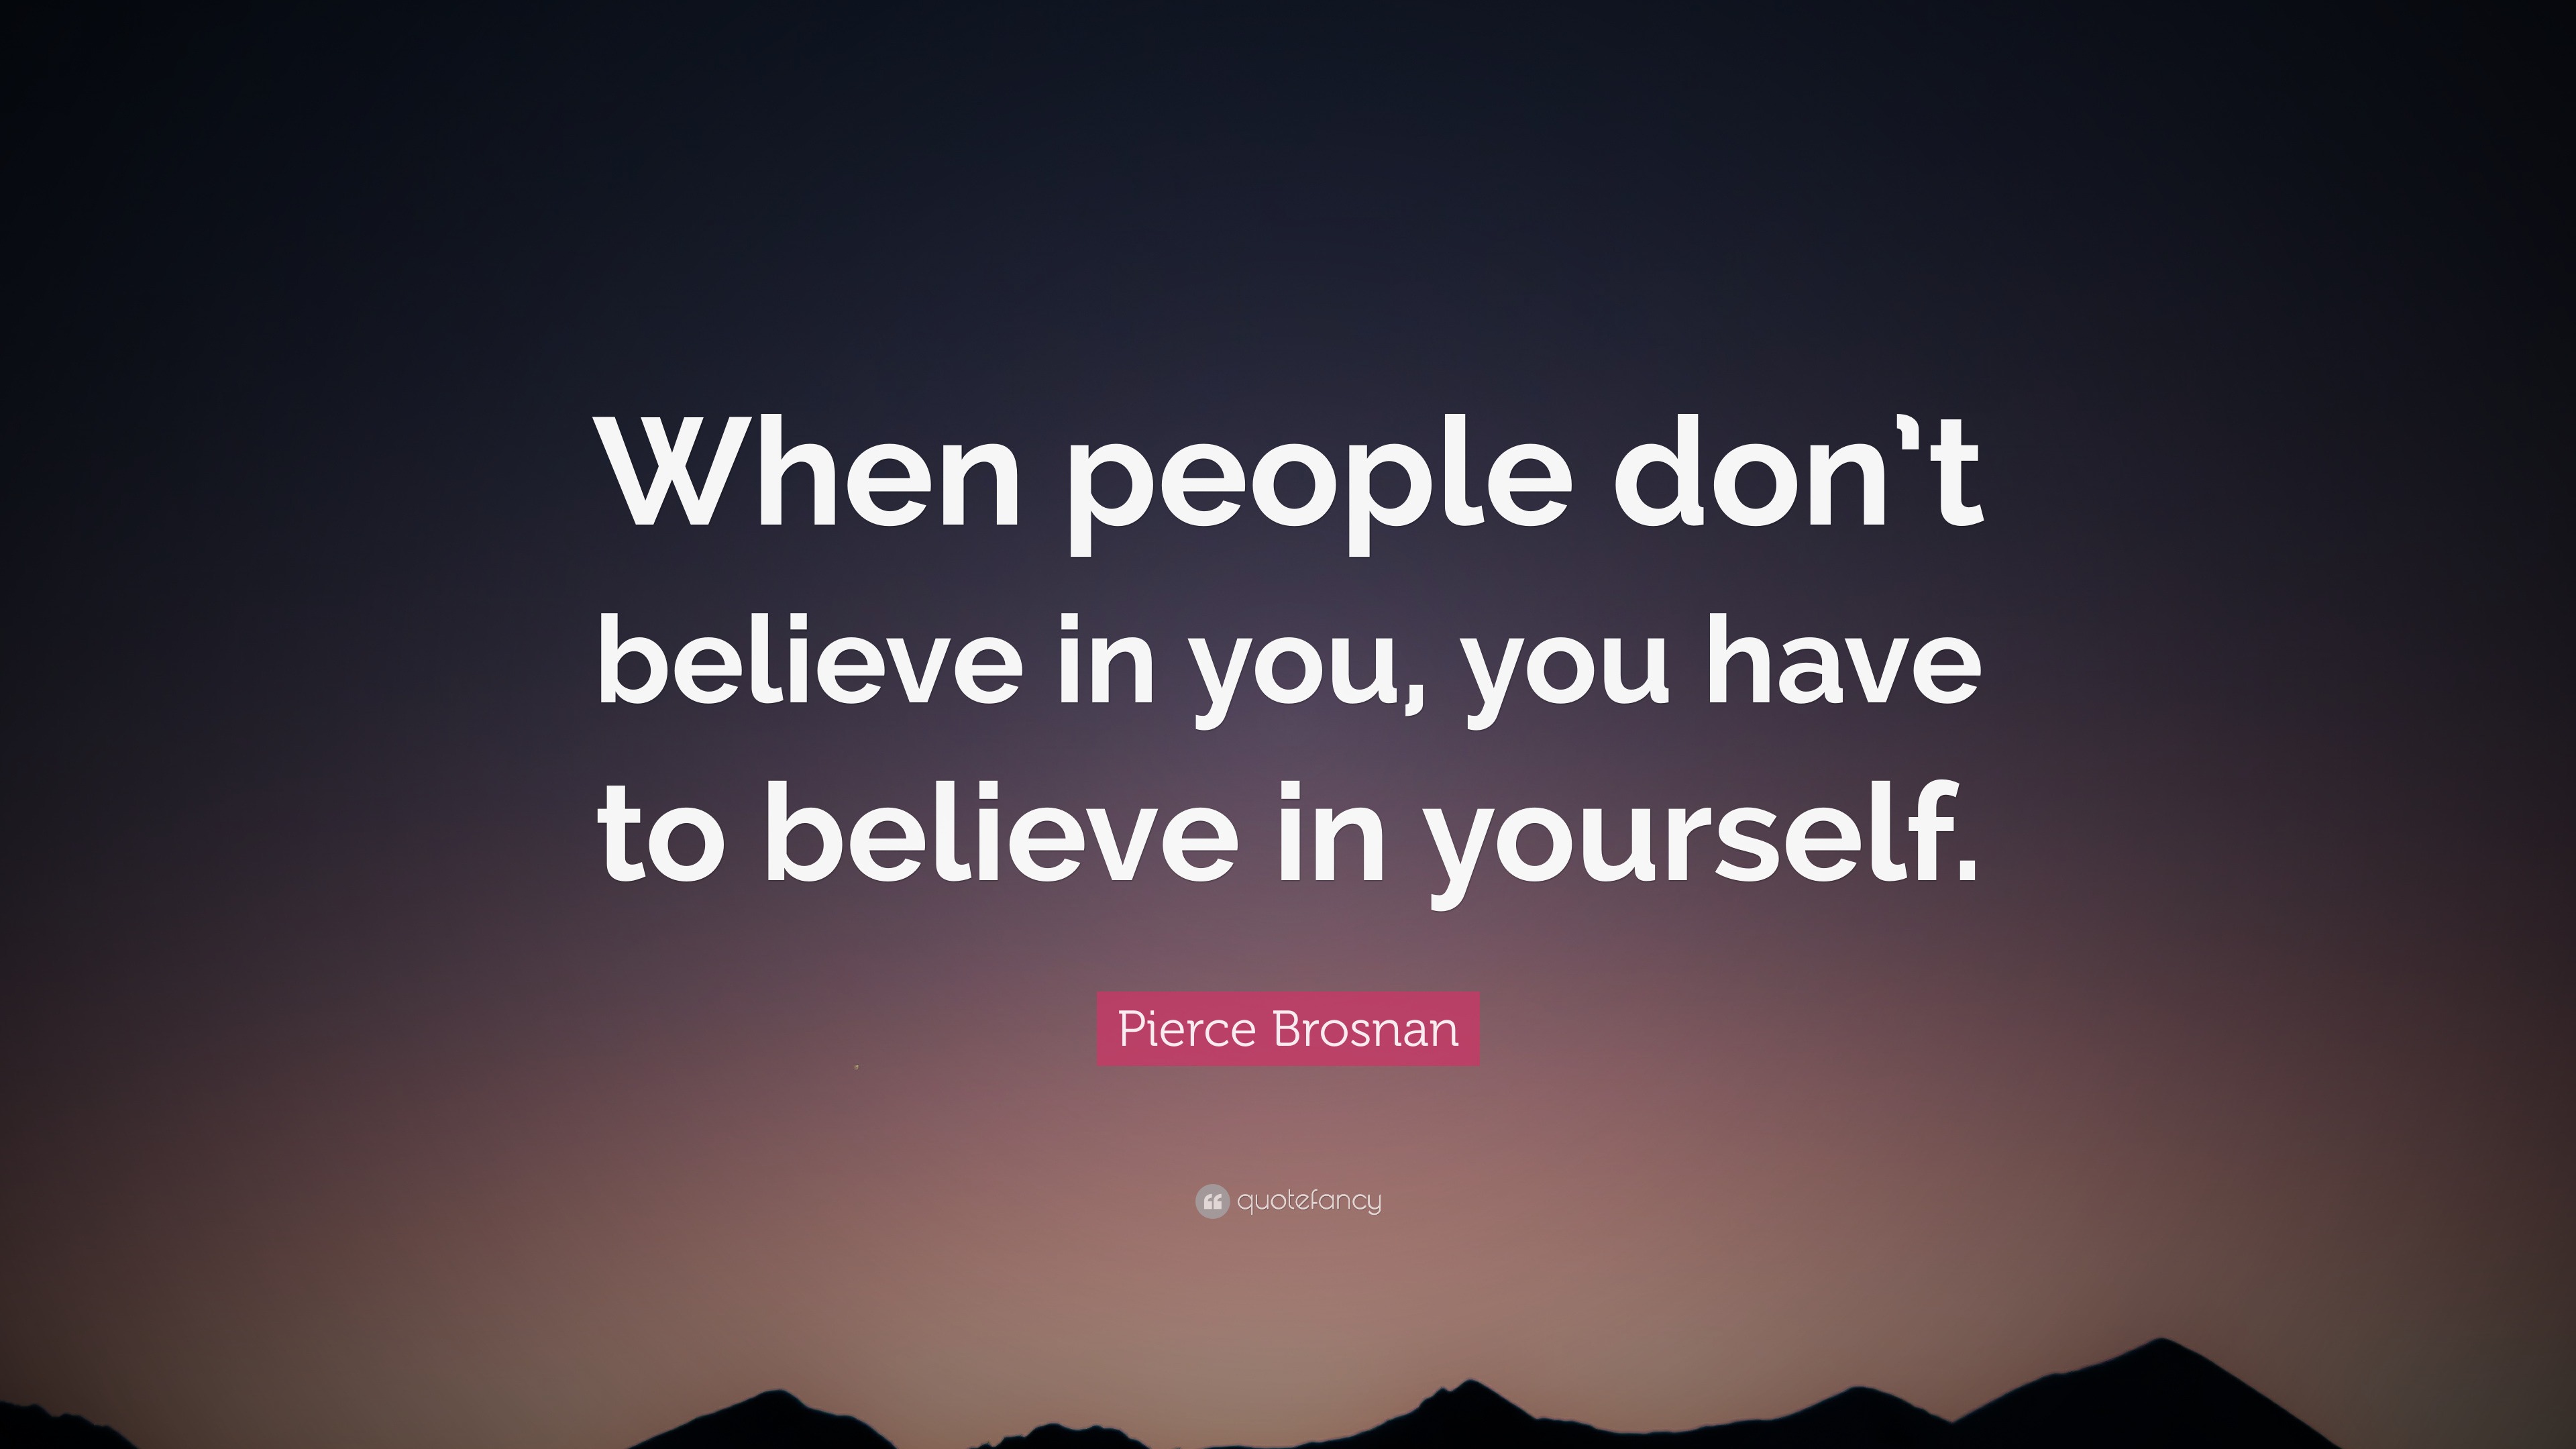 Pierce Brosnan Quote “When people don’t believe in you